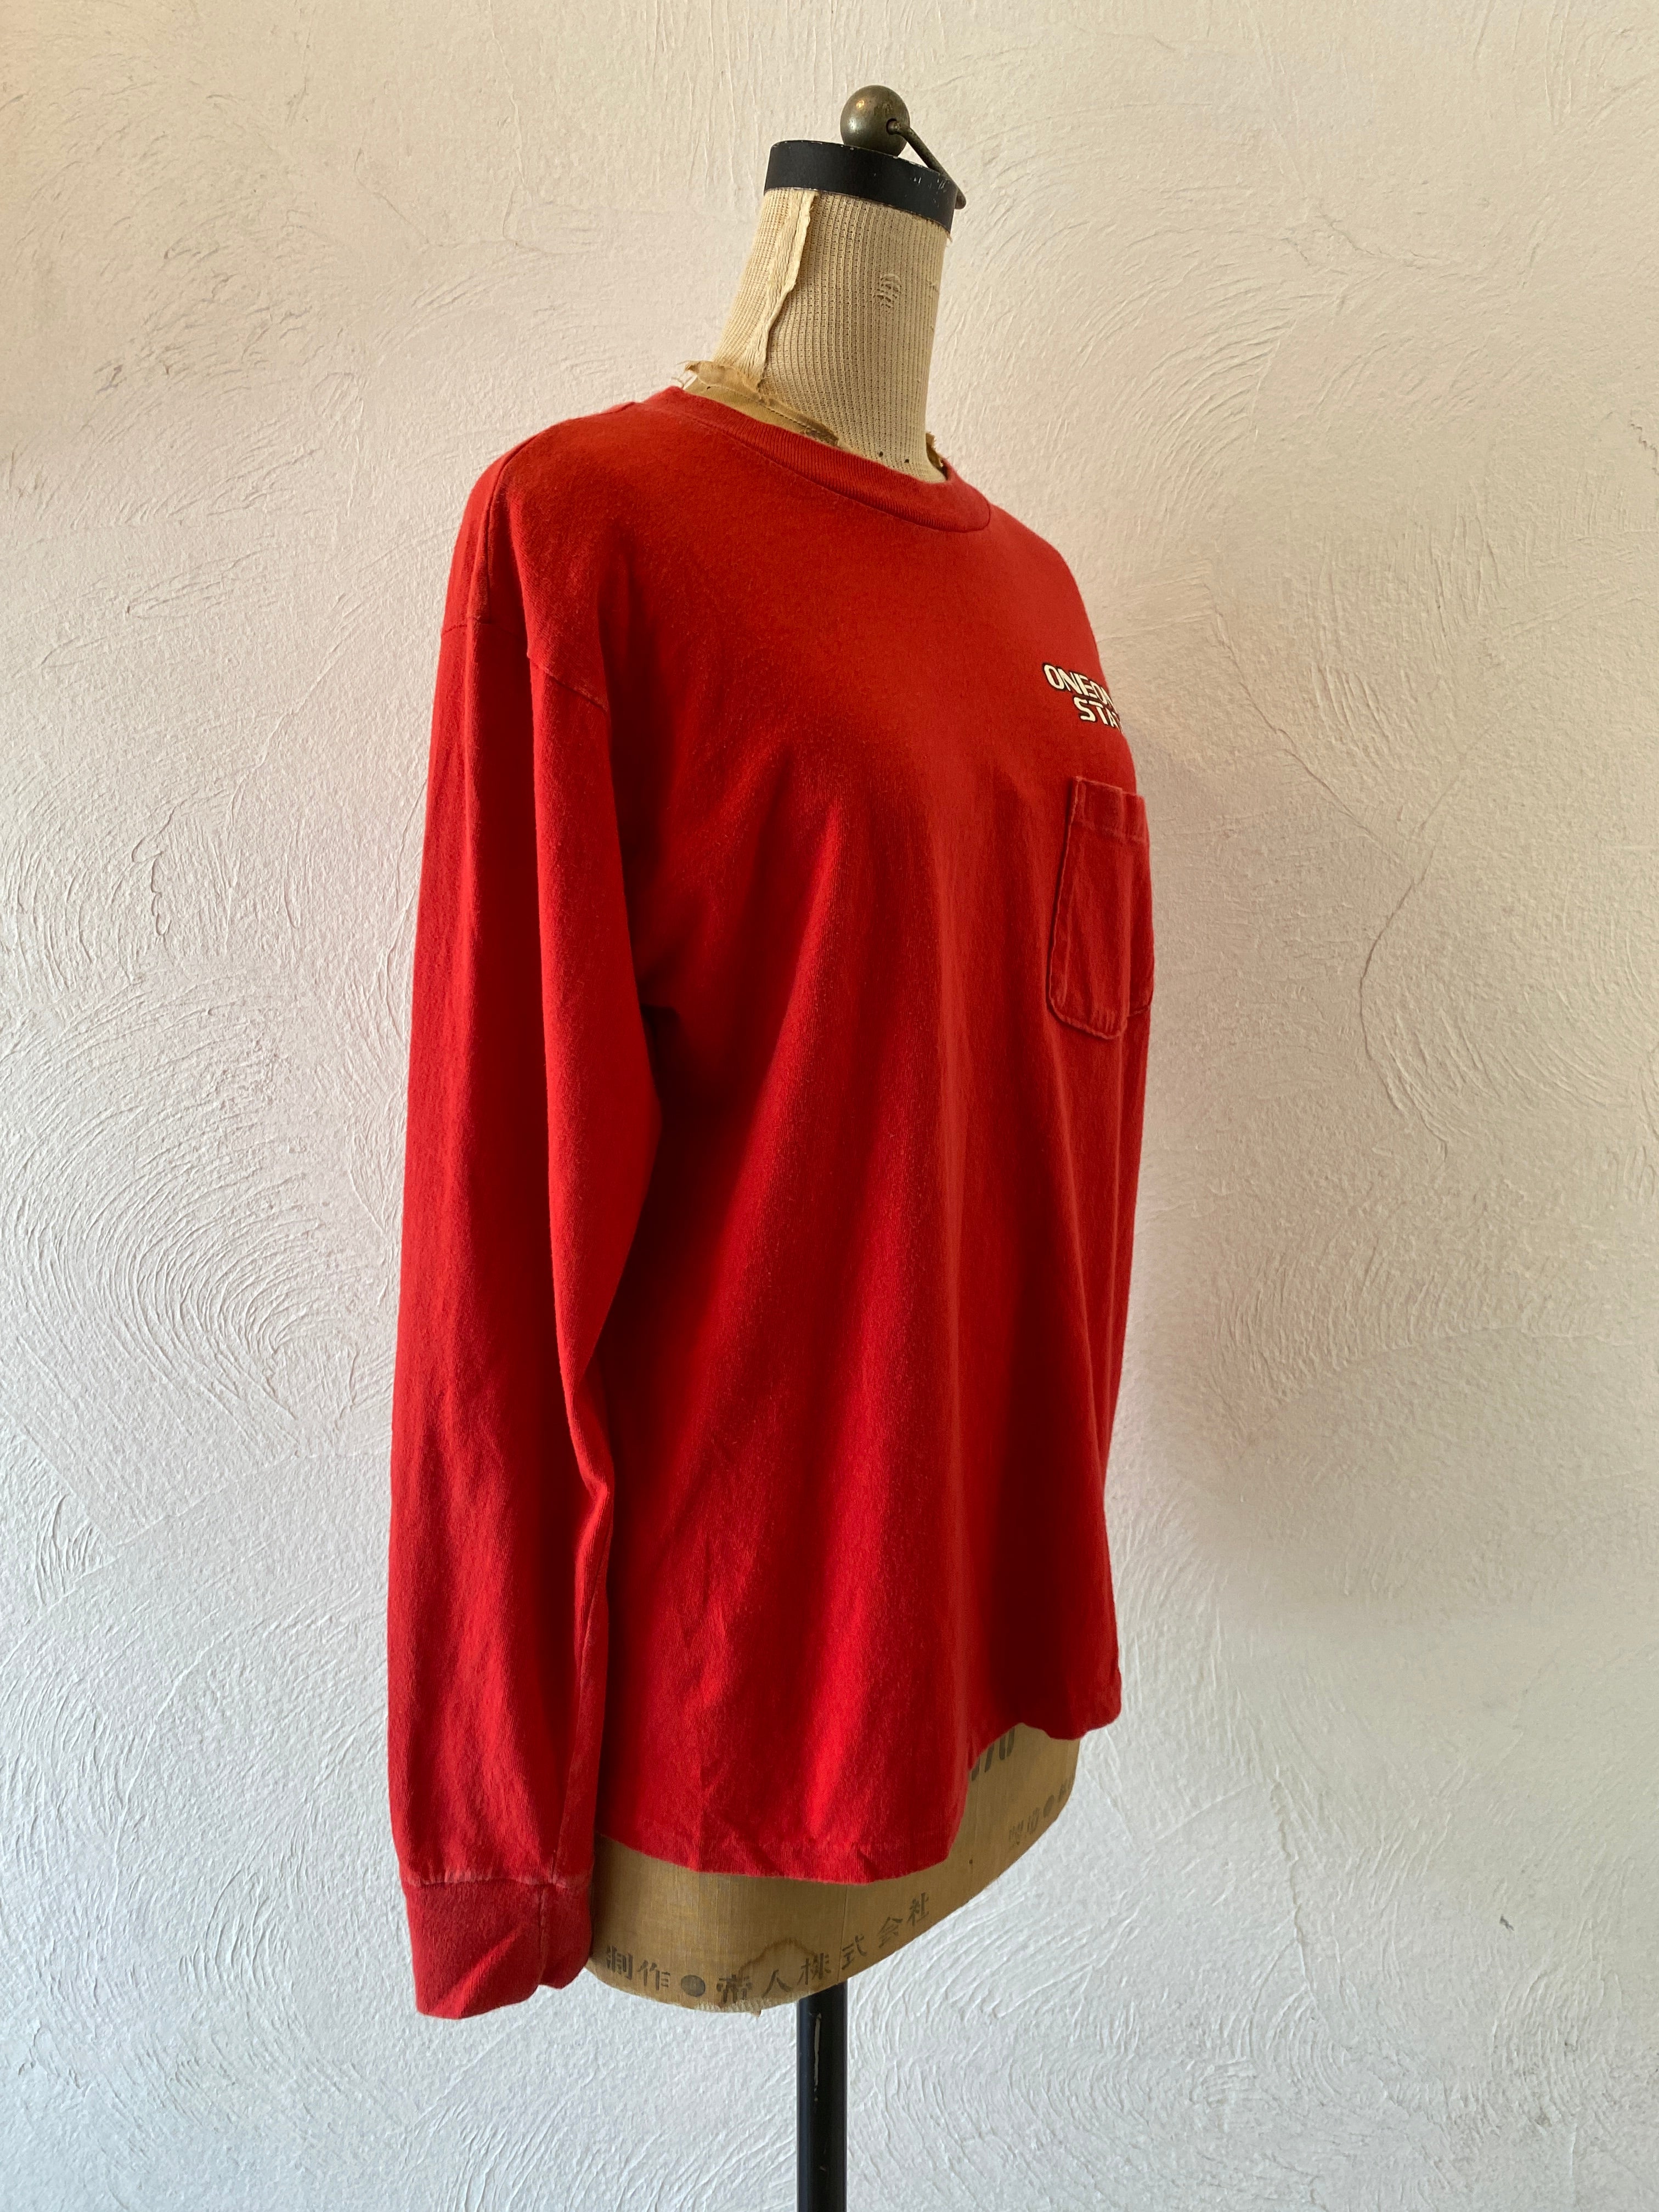 red long sleeve T